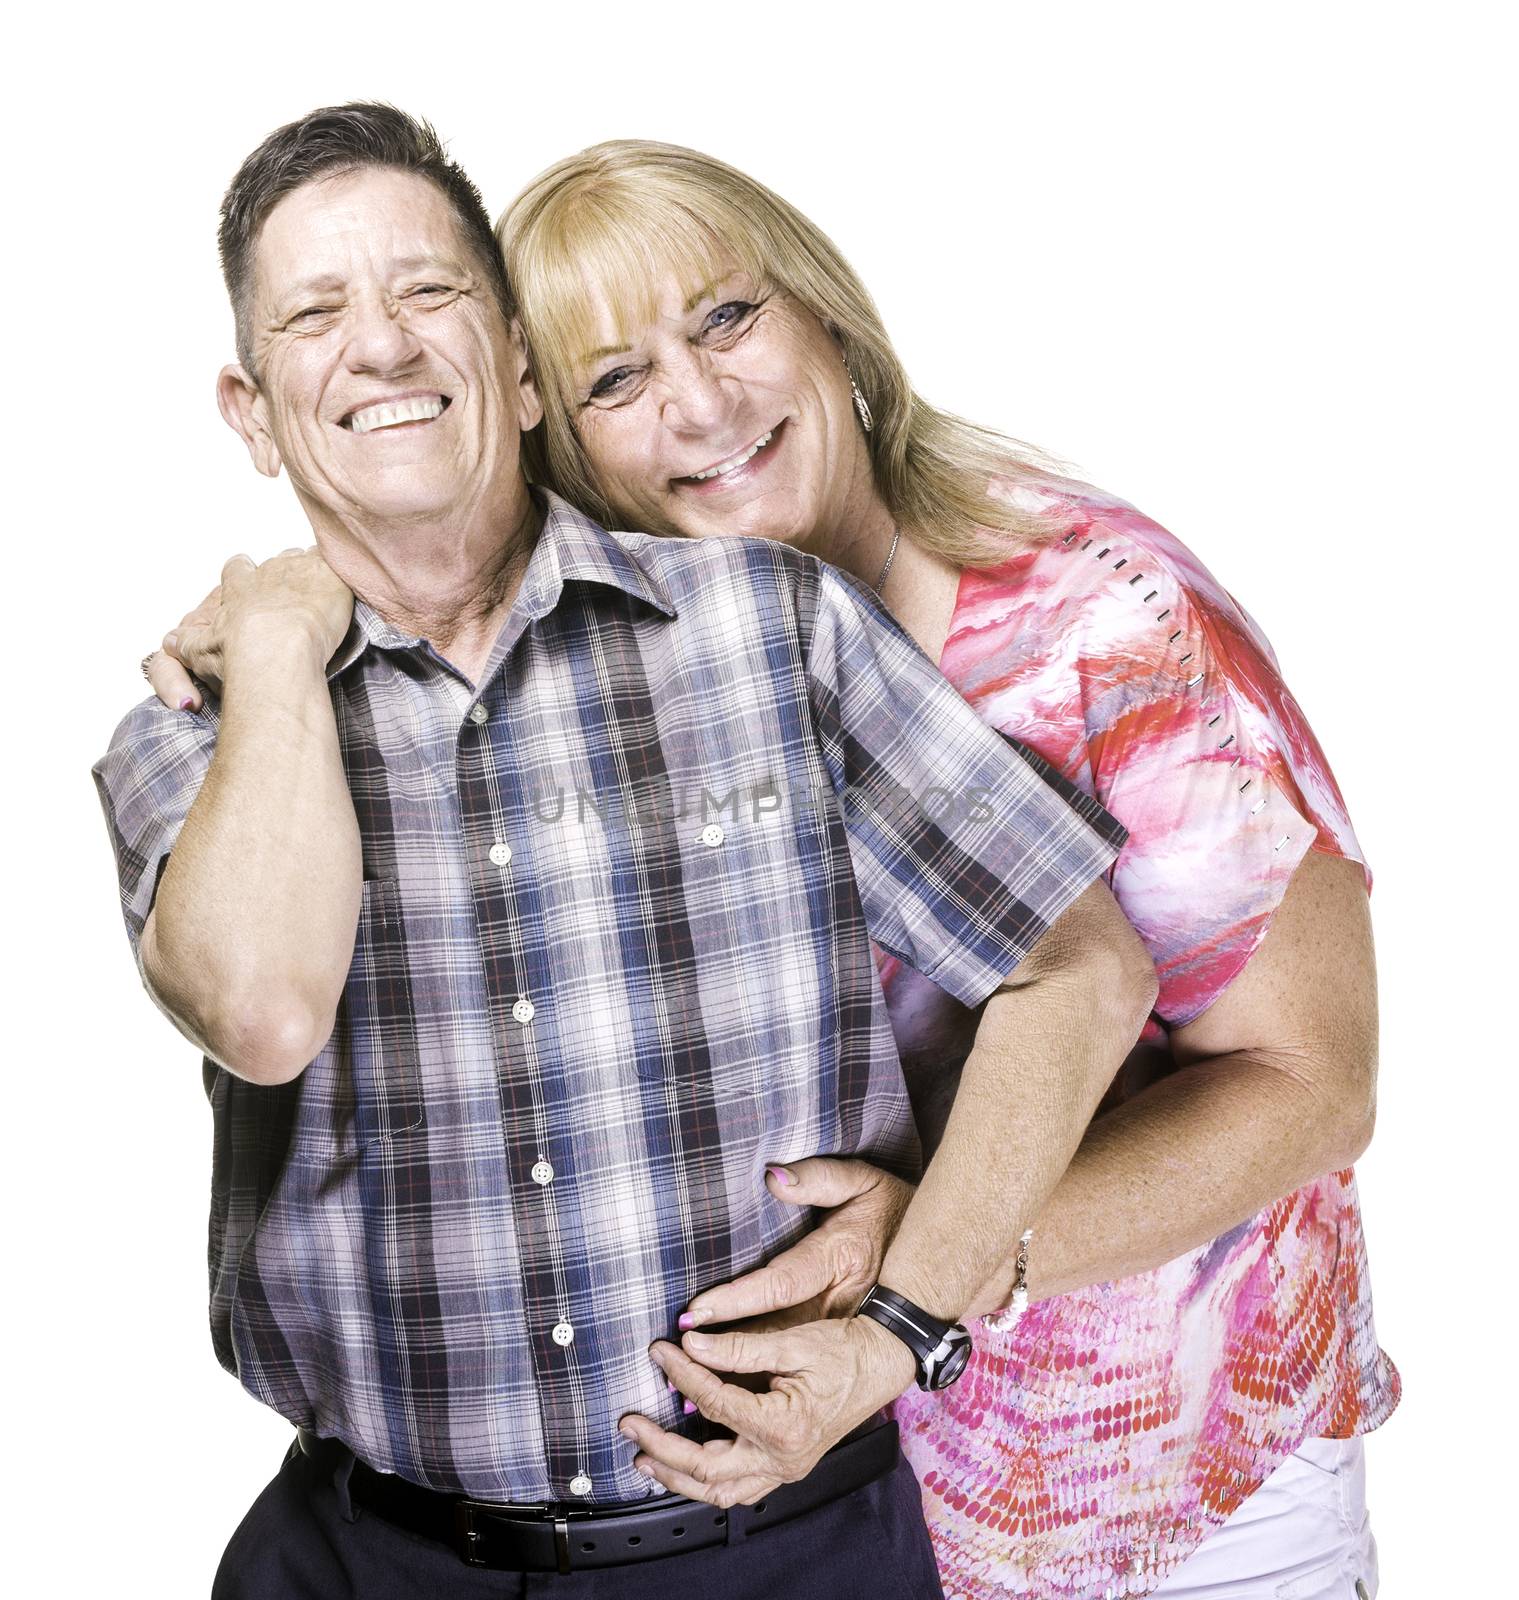 Smiling Transgender Man and Woman Posing Close Together by Creatista